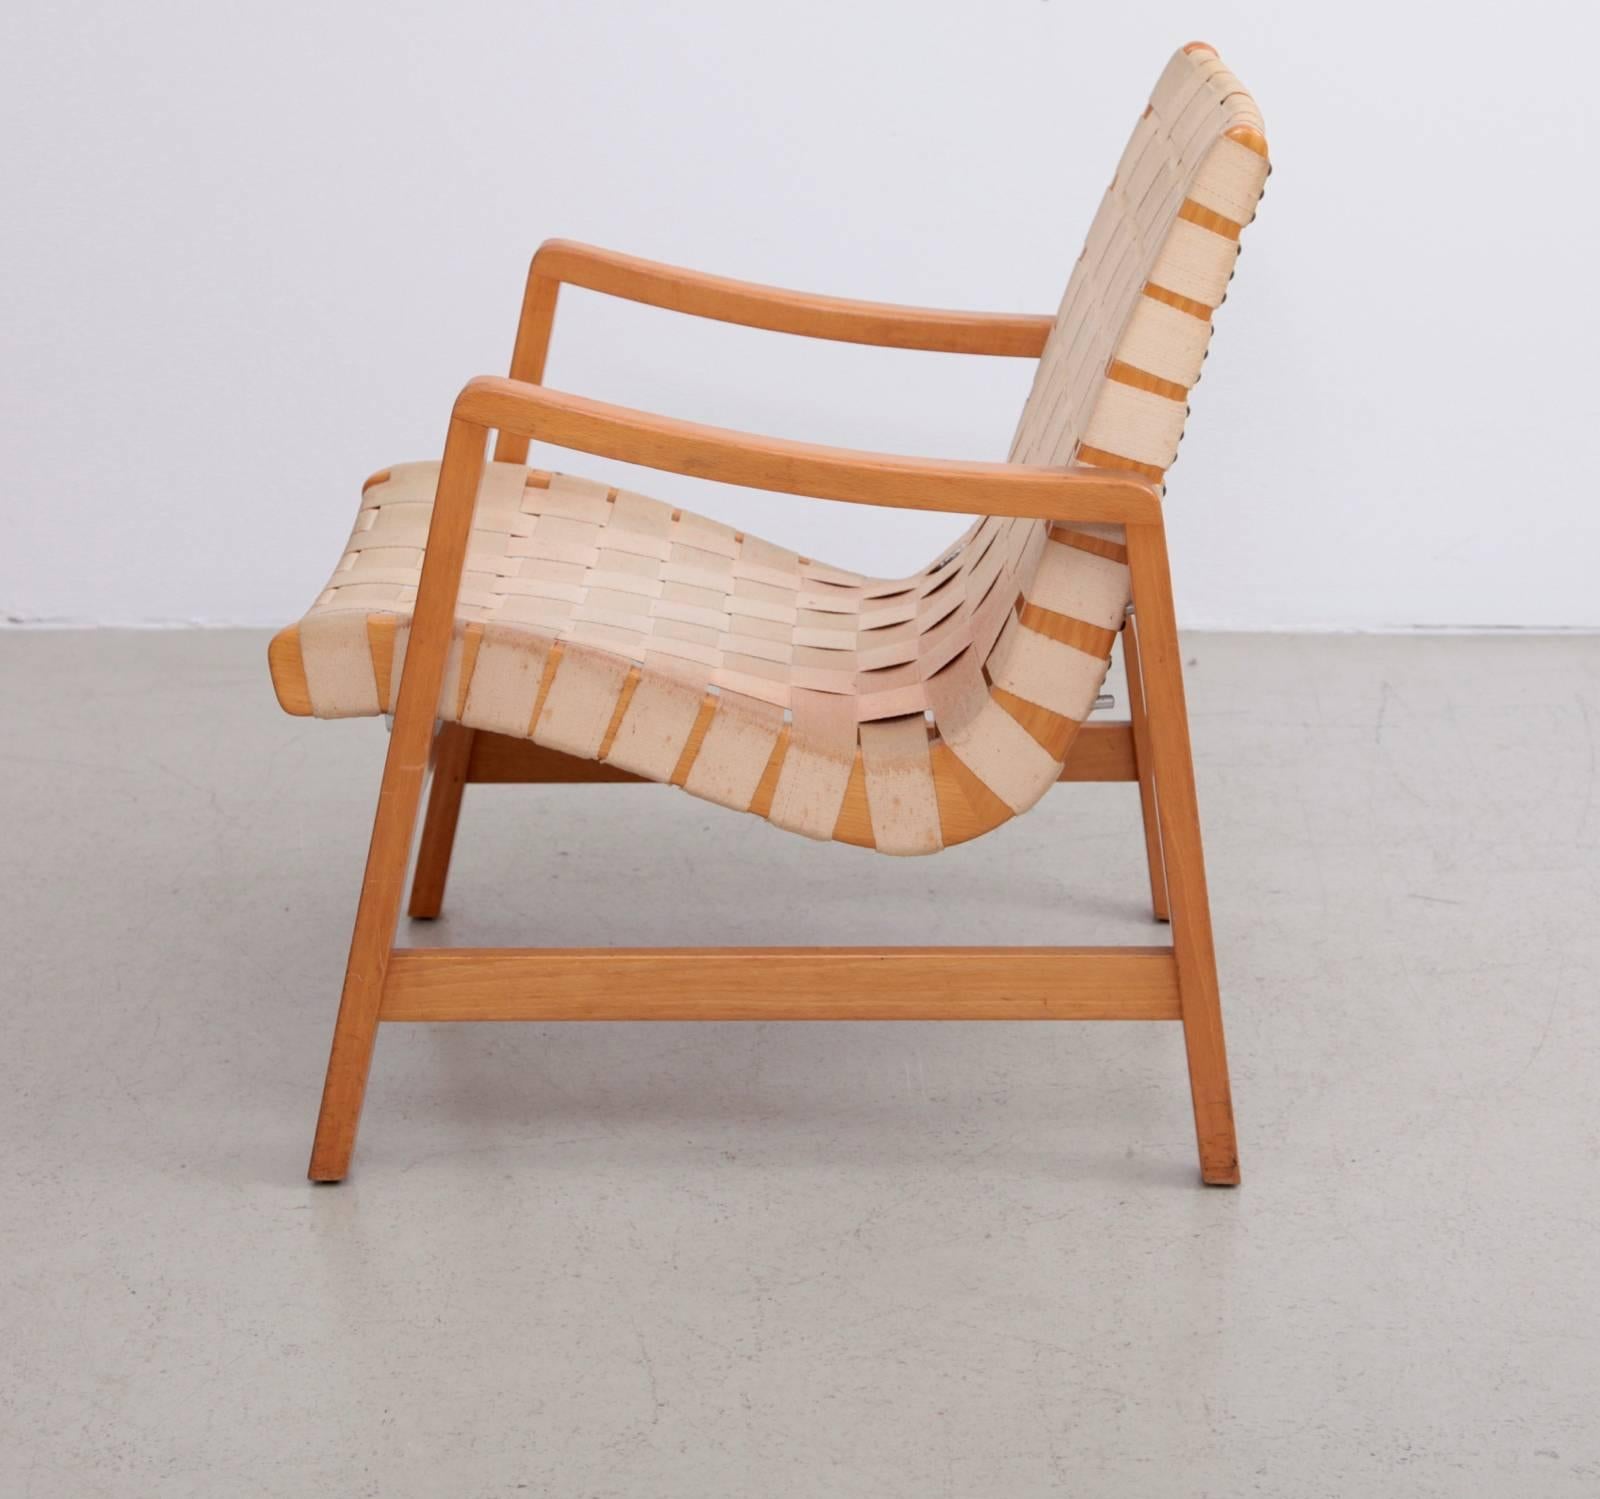 Early Jens Risom armchair by Vostra (German licensed and labeled) with off-white original webbing. The chair has two possible positions. Occasional and lounge chair height. Very good vintage condition.